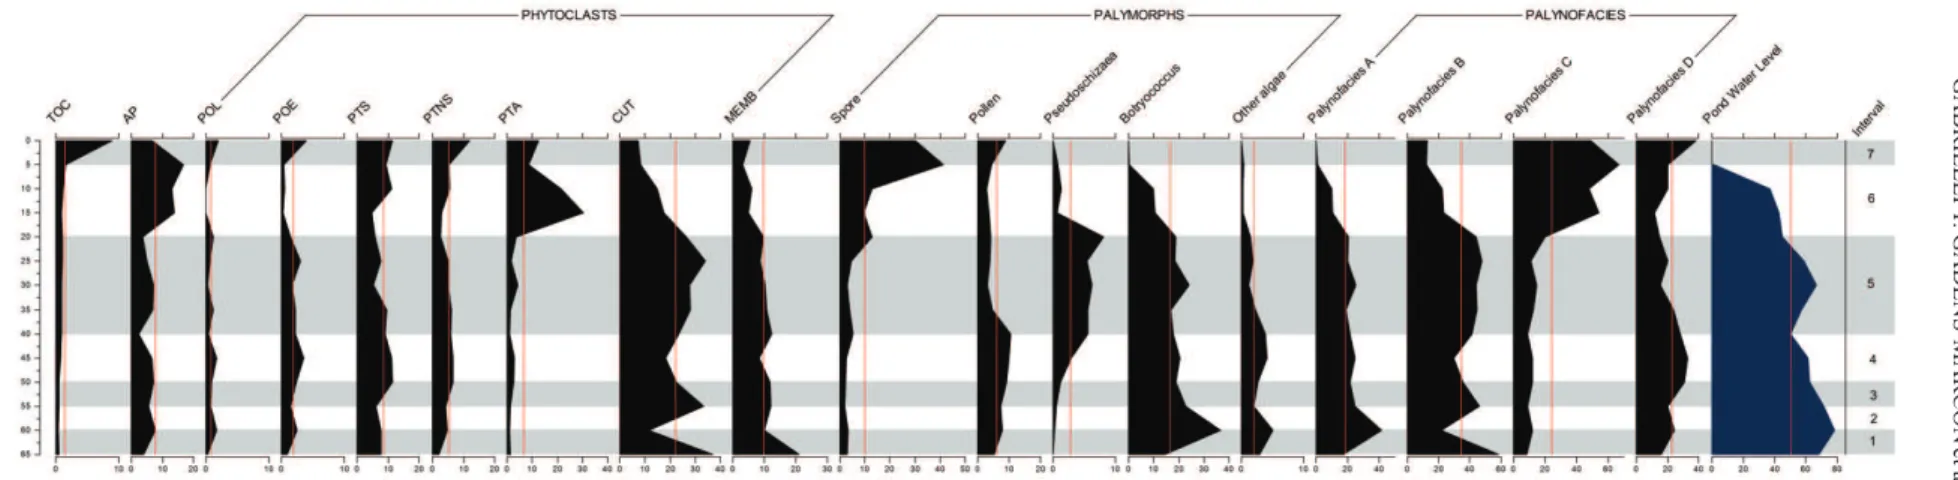 Fig. 8 - Variation of the palynofacial and geochemical parameters of the main groups and subgroups of POM